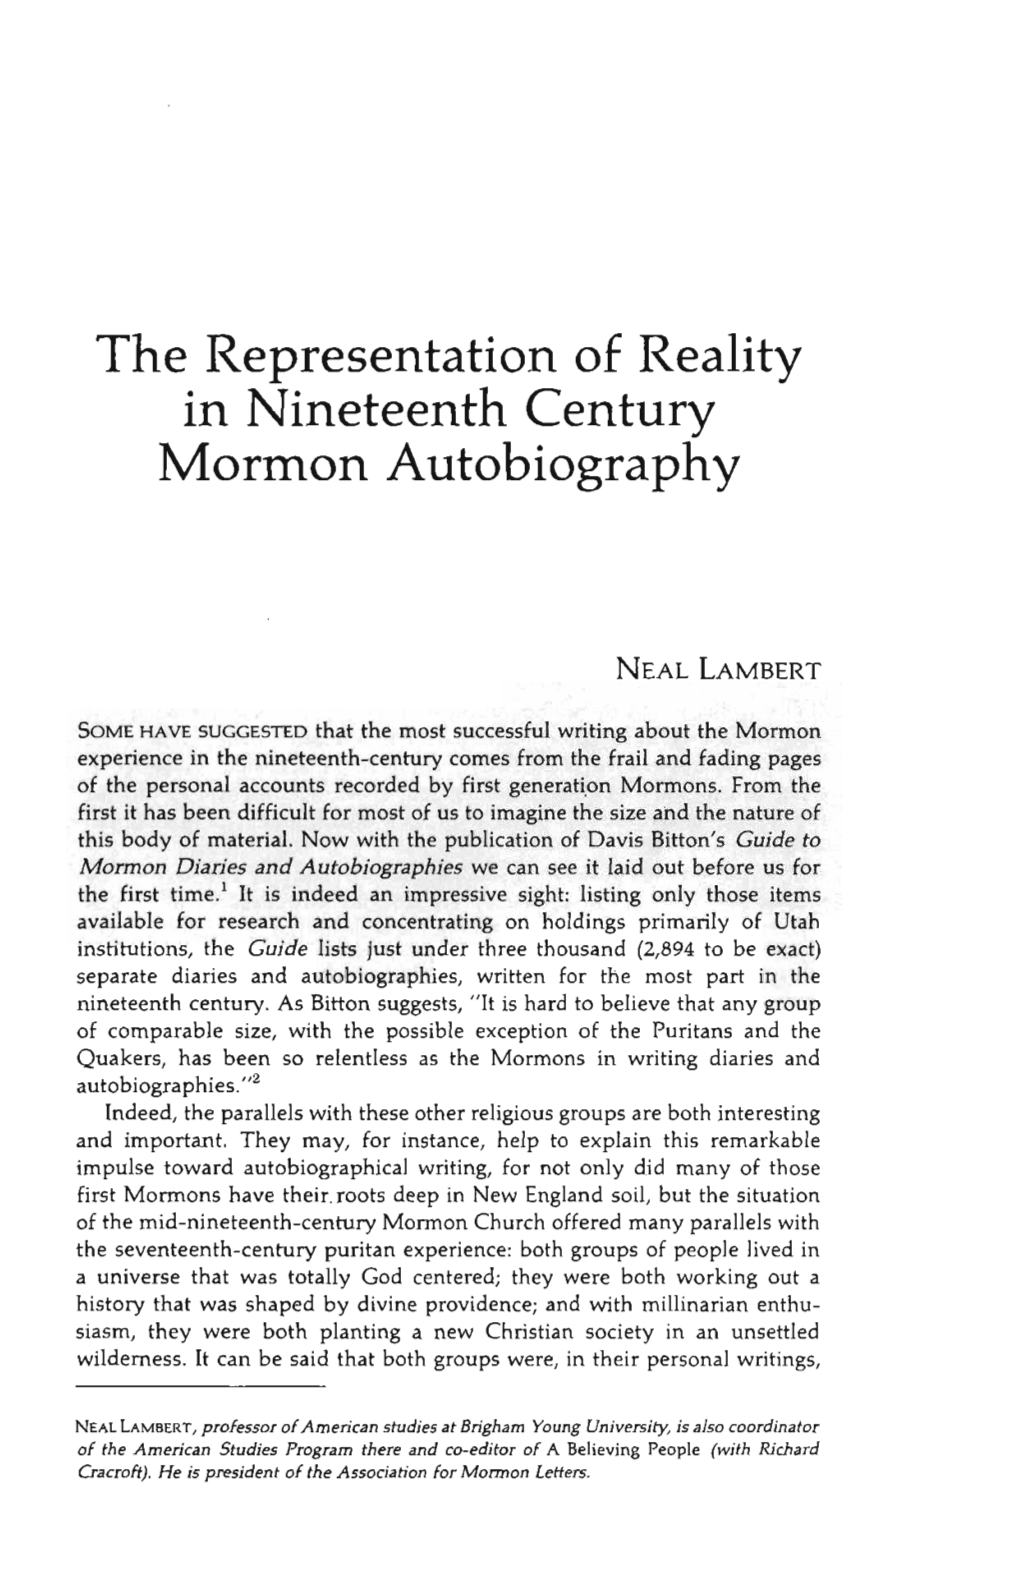 The Representation of Reality in Nineteenth Century Mormon Autobiography